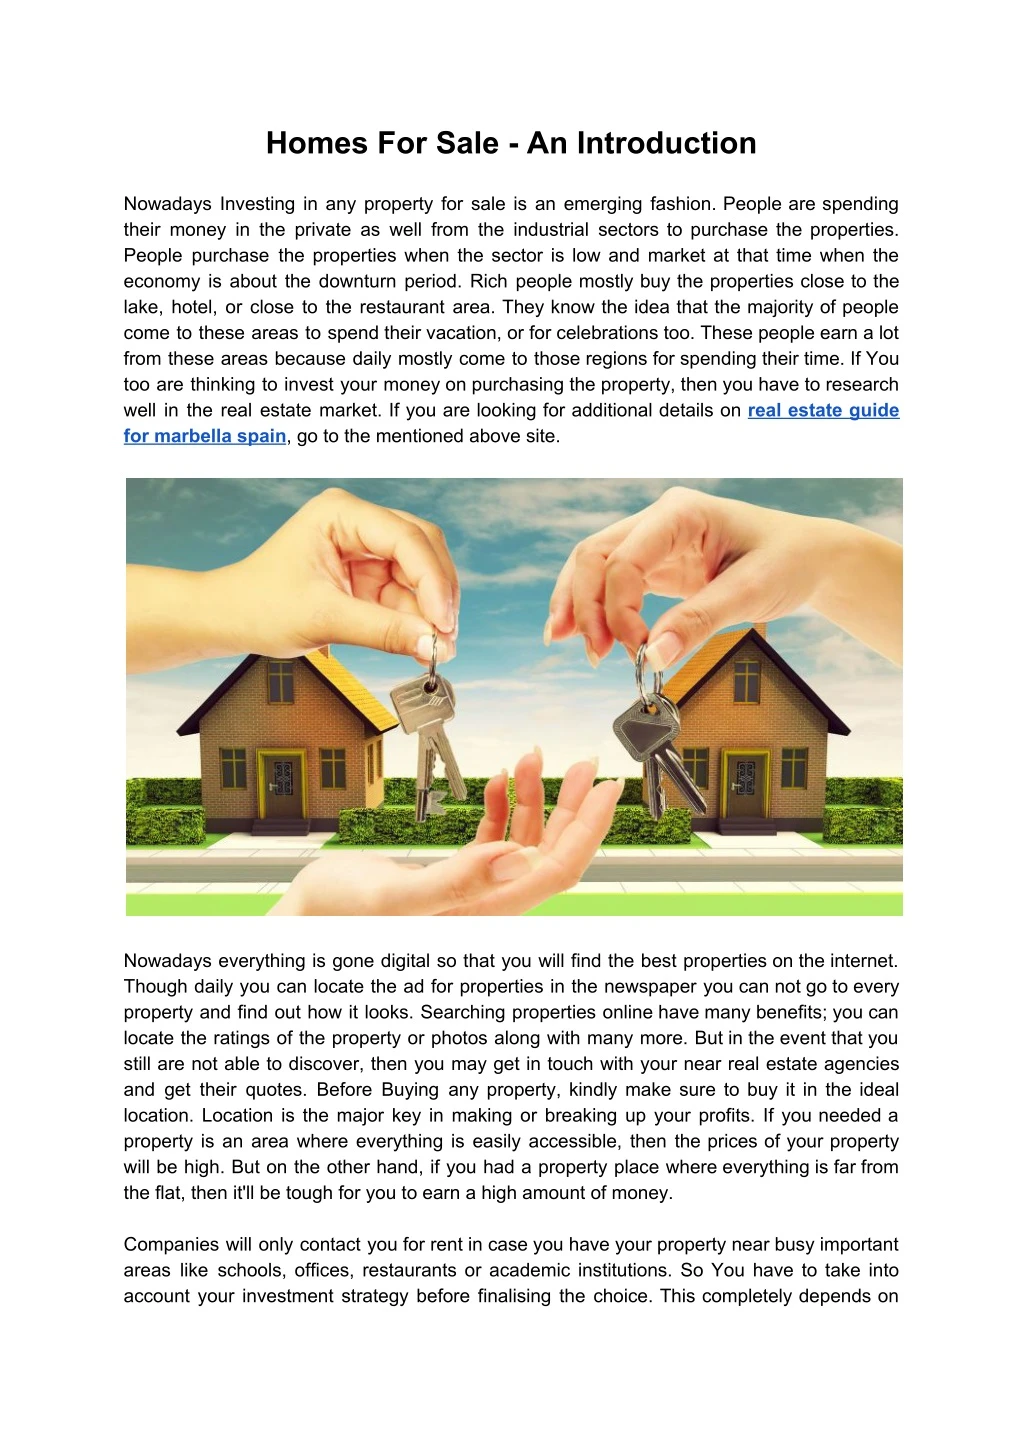 homes for sale an introduction